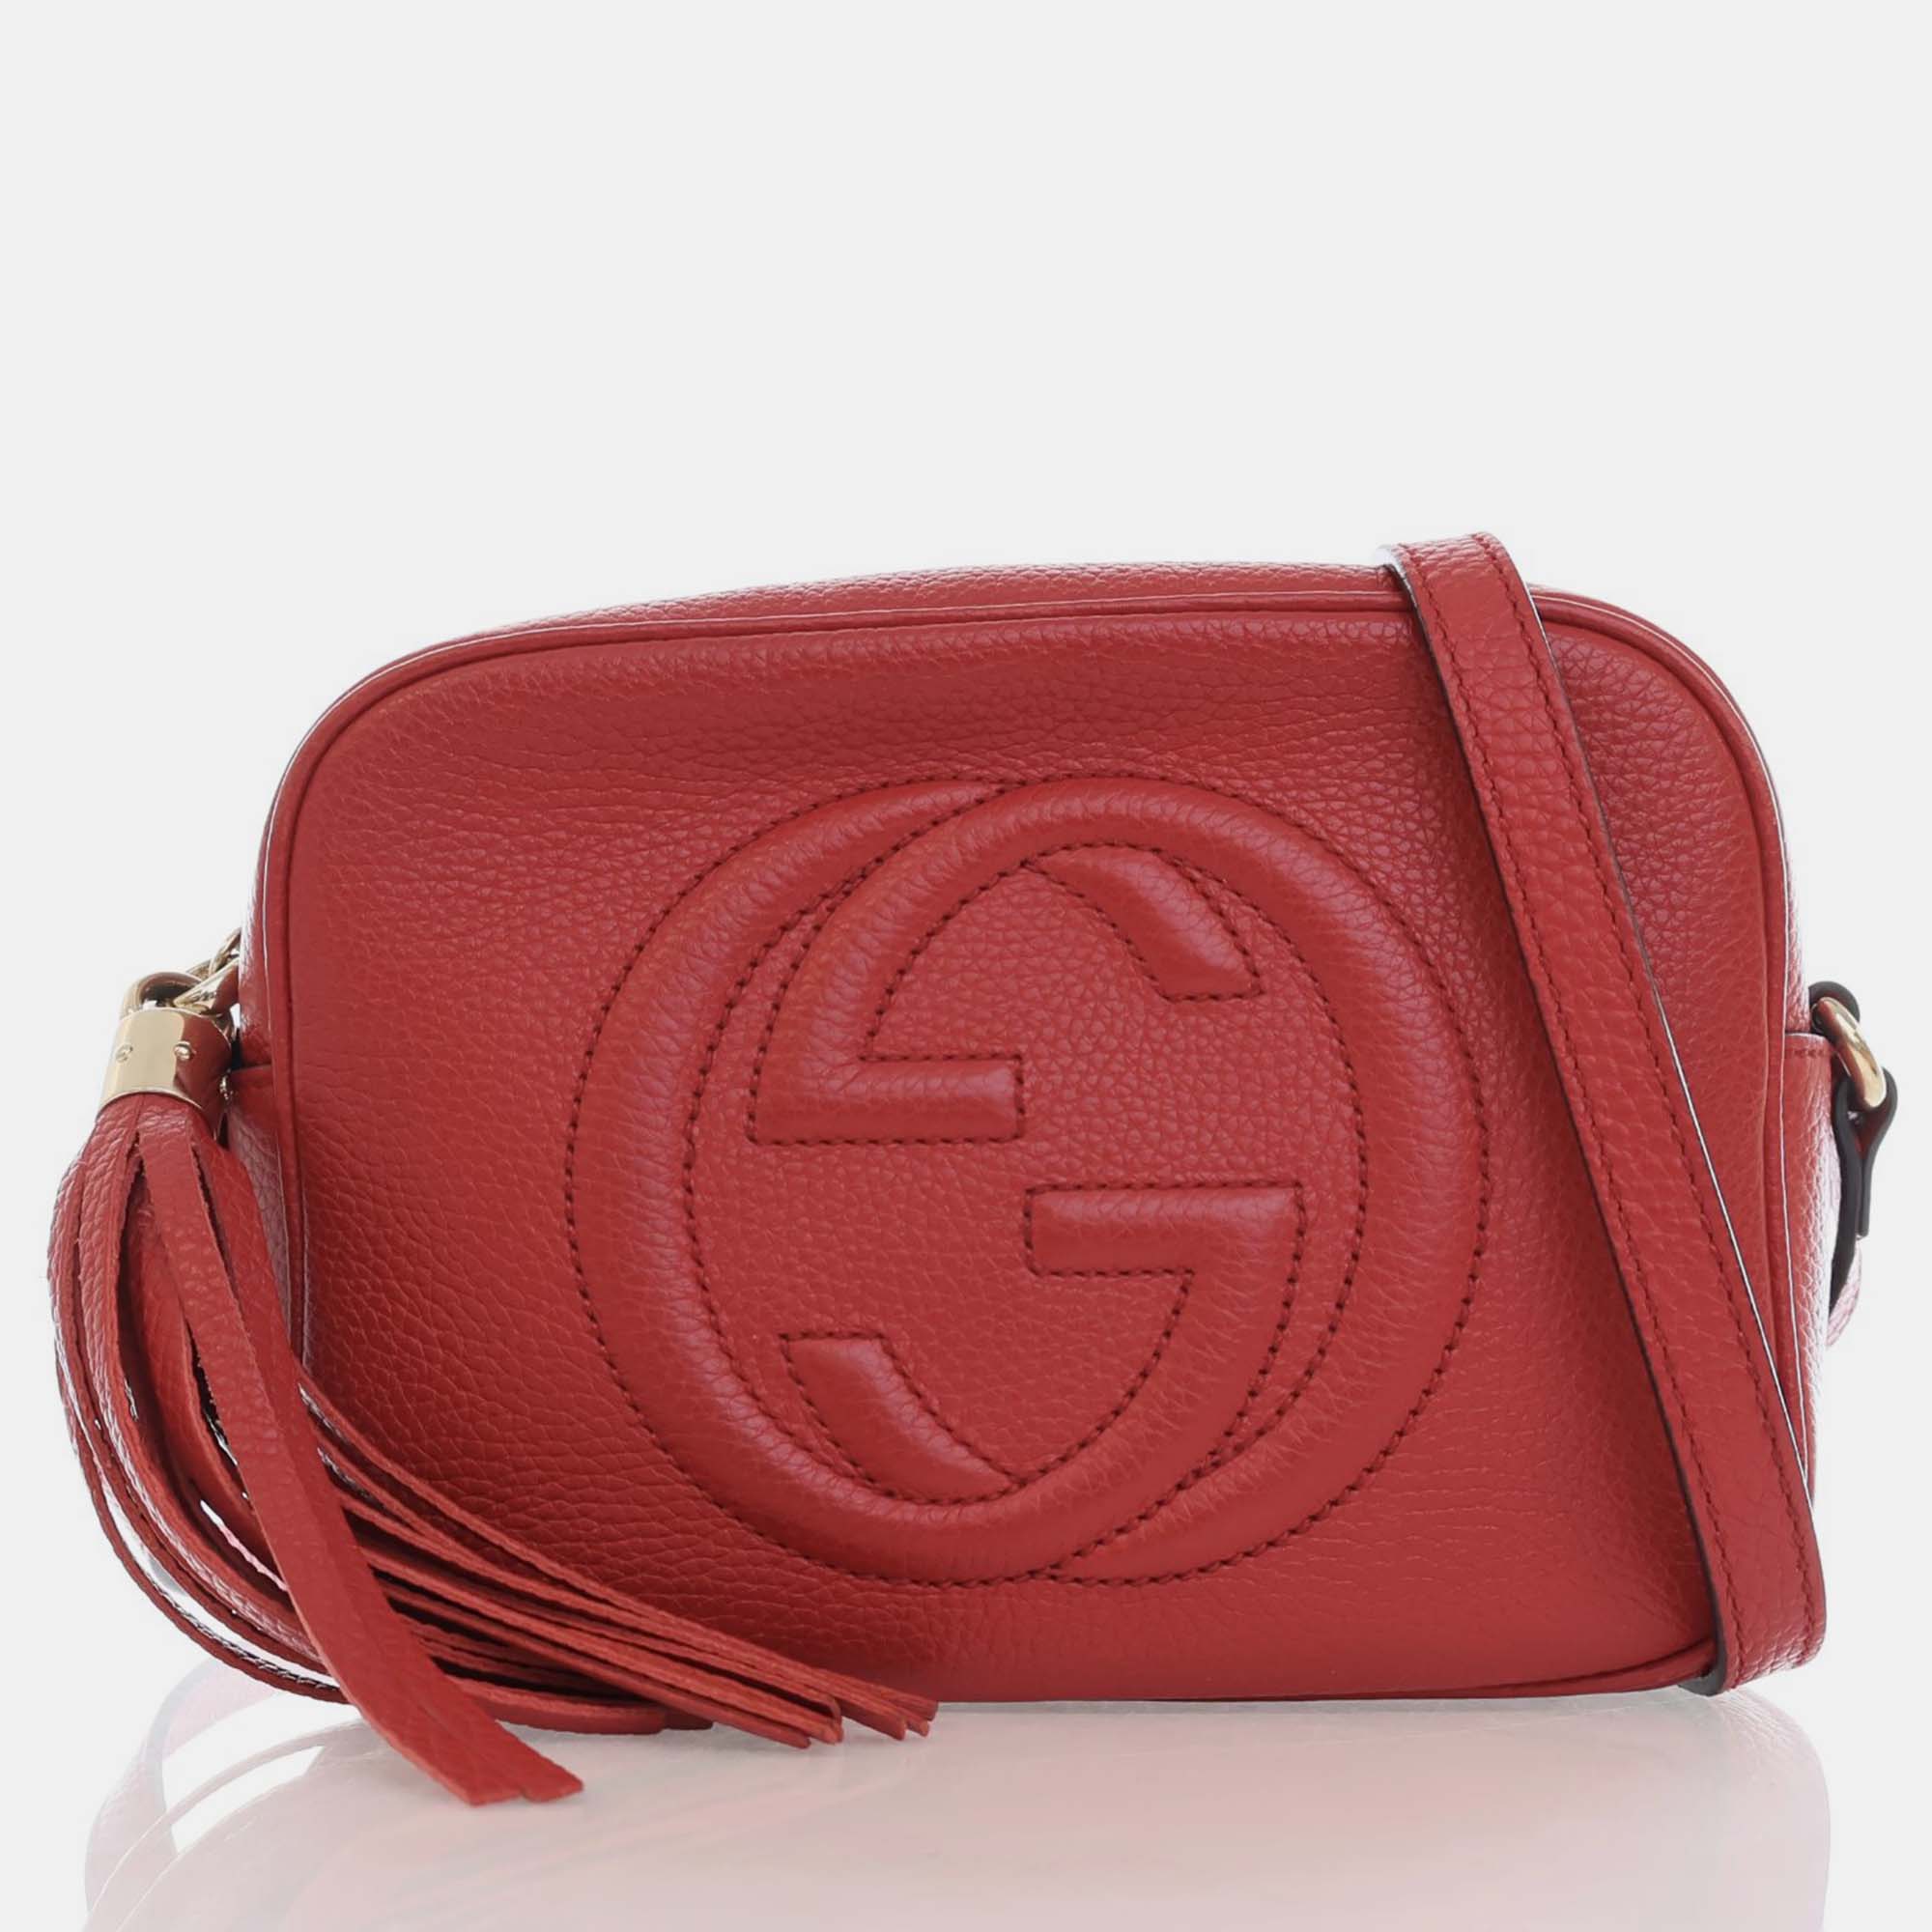 

Gucci Red Leather Small Soho Disco Shoulder Bag